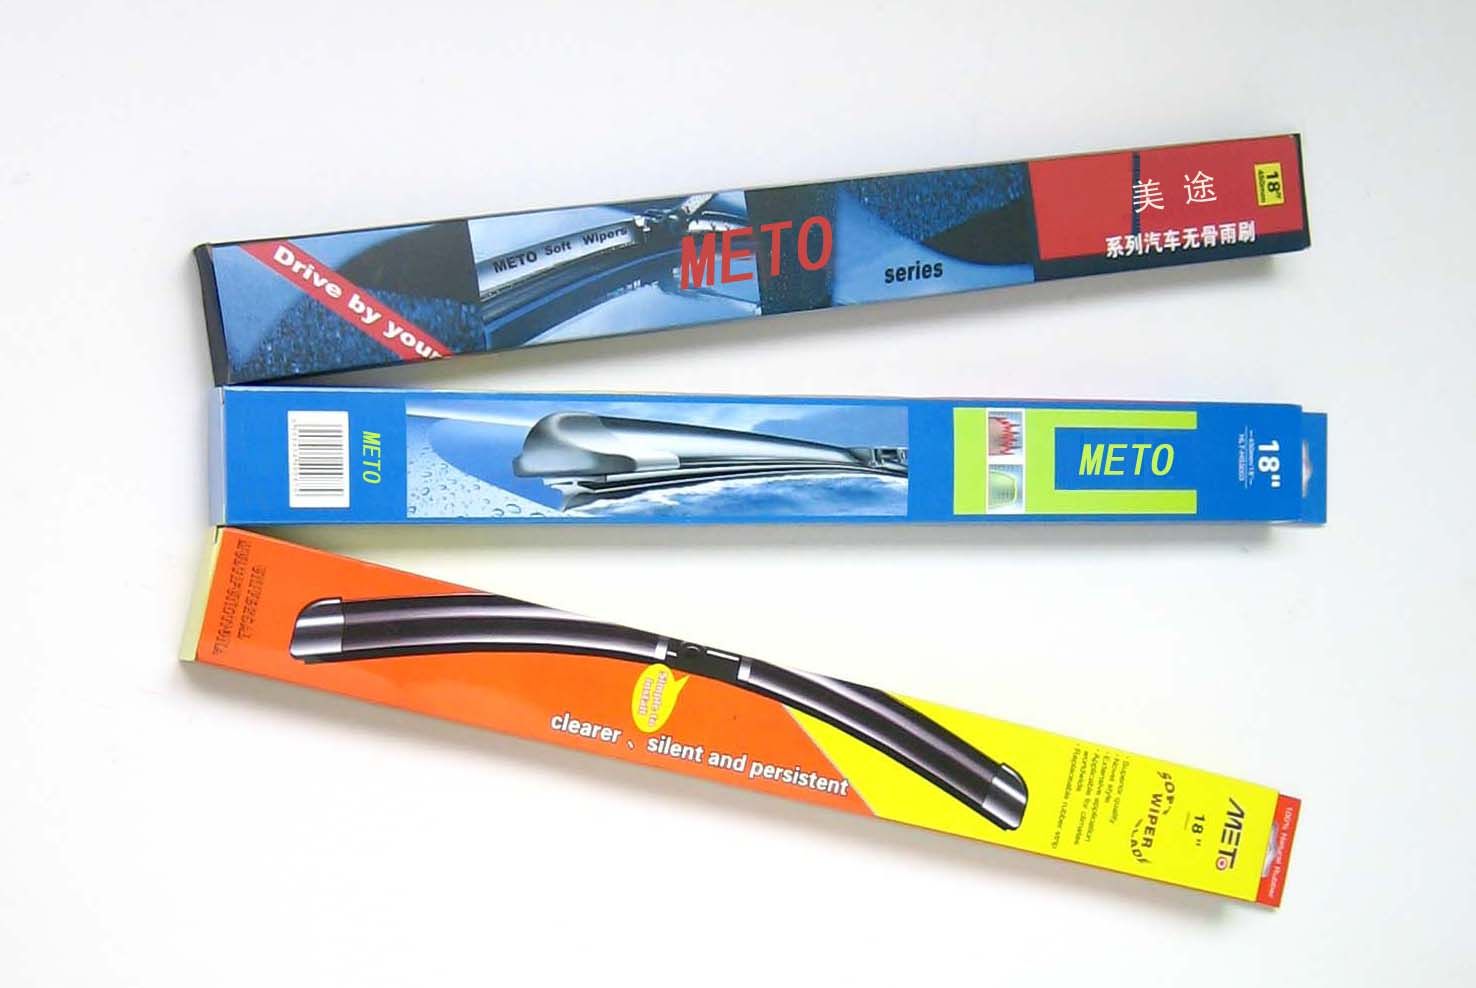 New Patent Product Auto Flat Wiper Blade WB-610 with 8 adaptors問屋・仕入れ・卸・卸売り